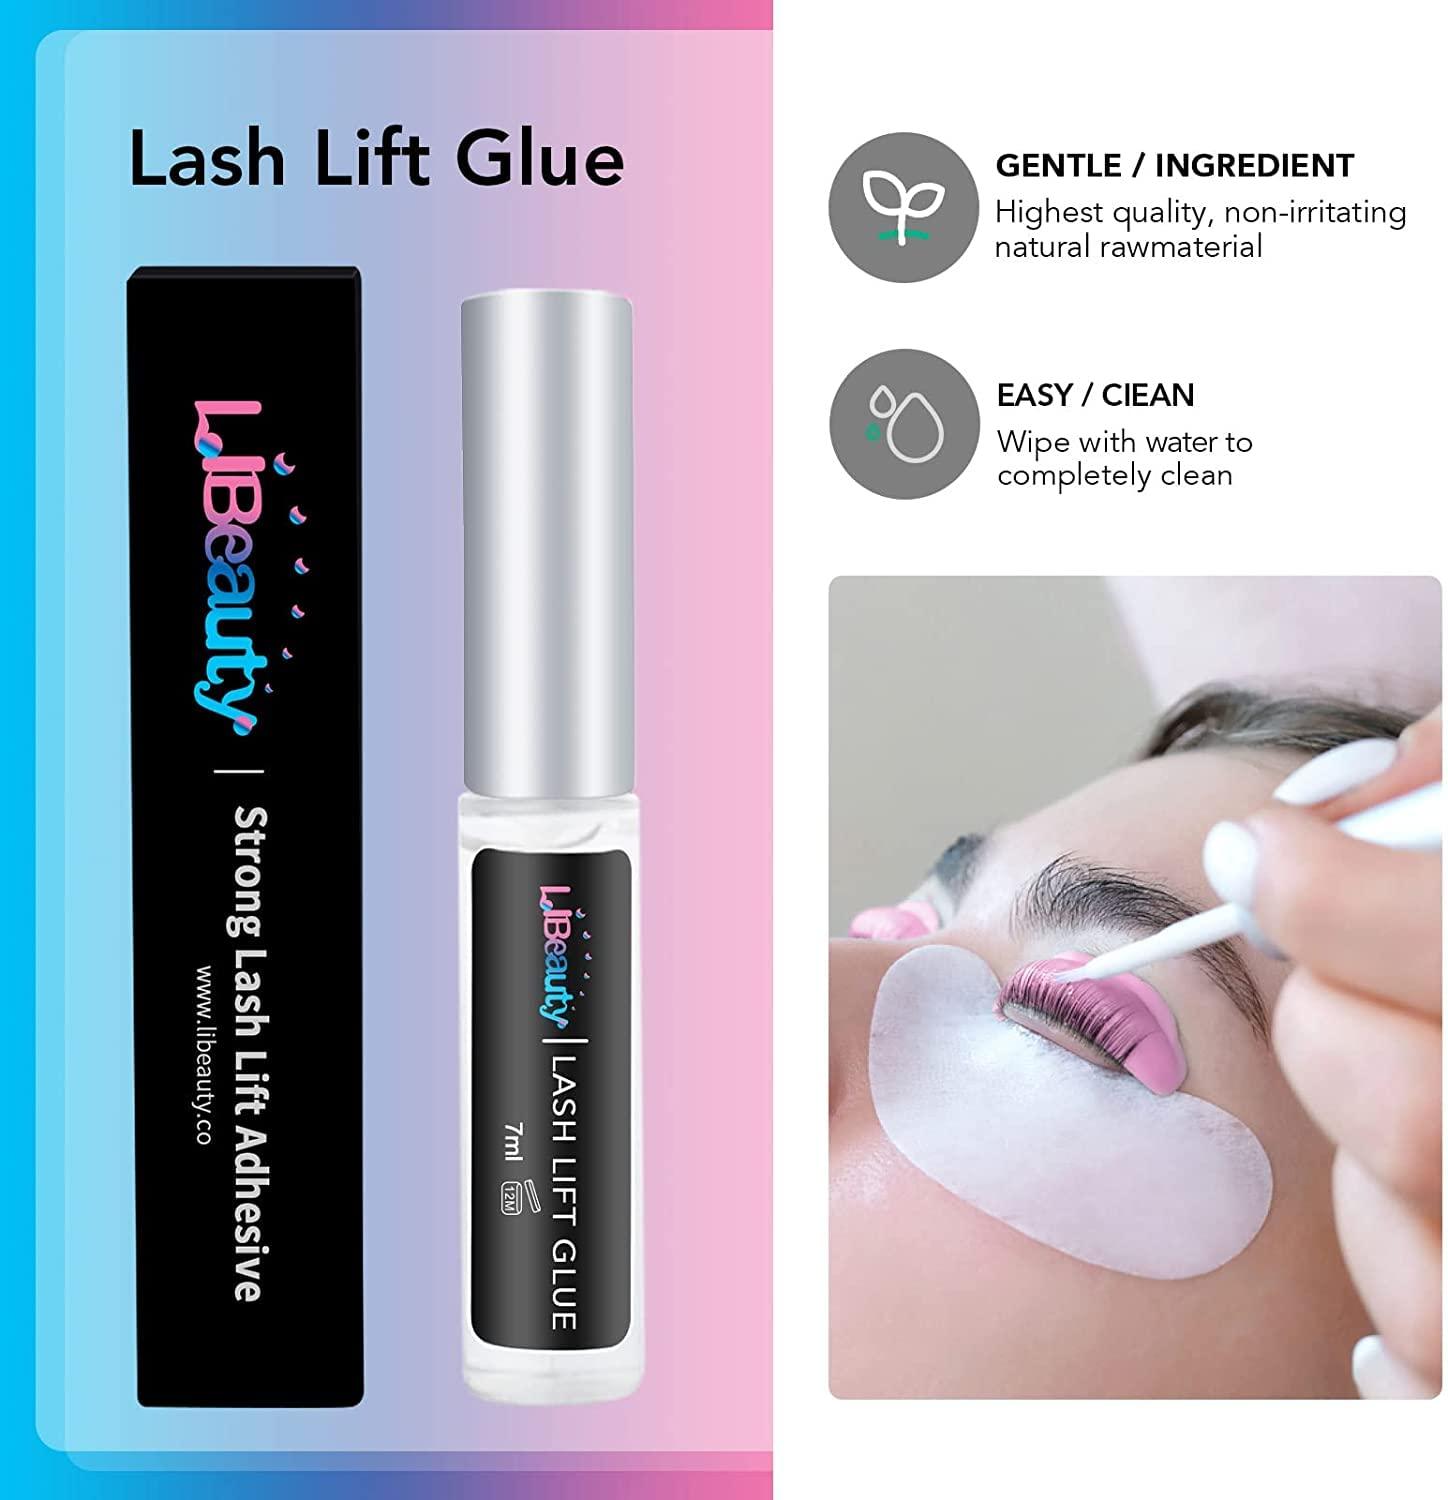  Libeauty Eyelash Lift and Color Kit Brow Lamination Kit with  Black Color Quick Lifting Perming & Voluminous Coloring with Complete Tools  DIY Lash Perm Use at Home & Salon Supplies 